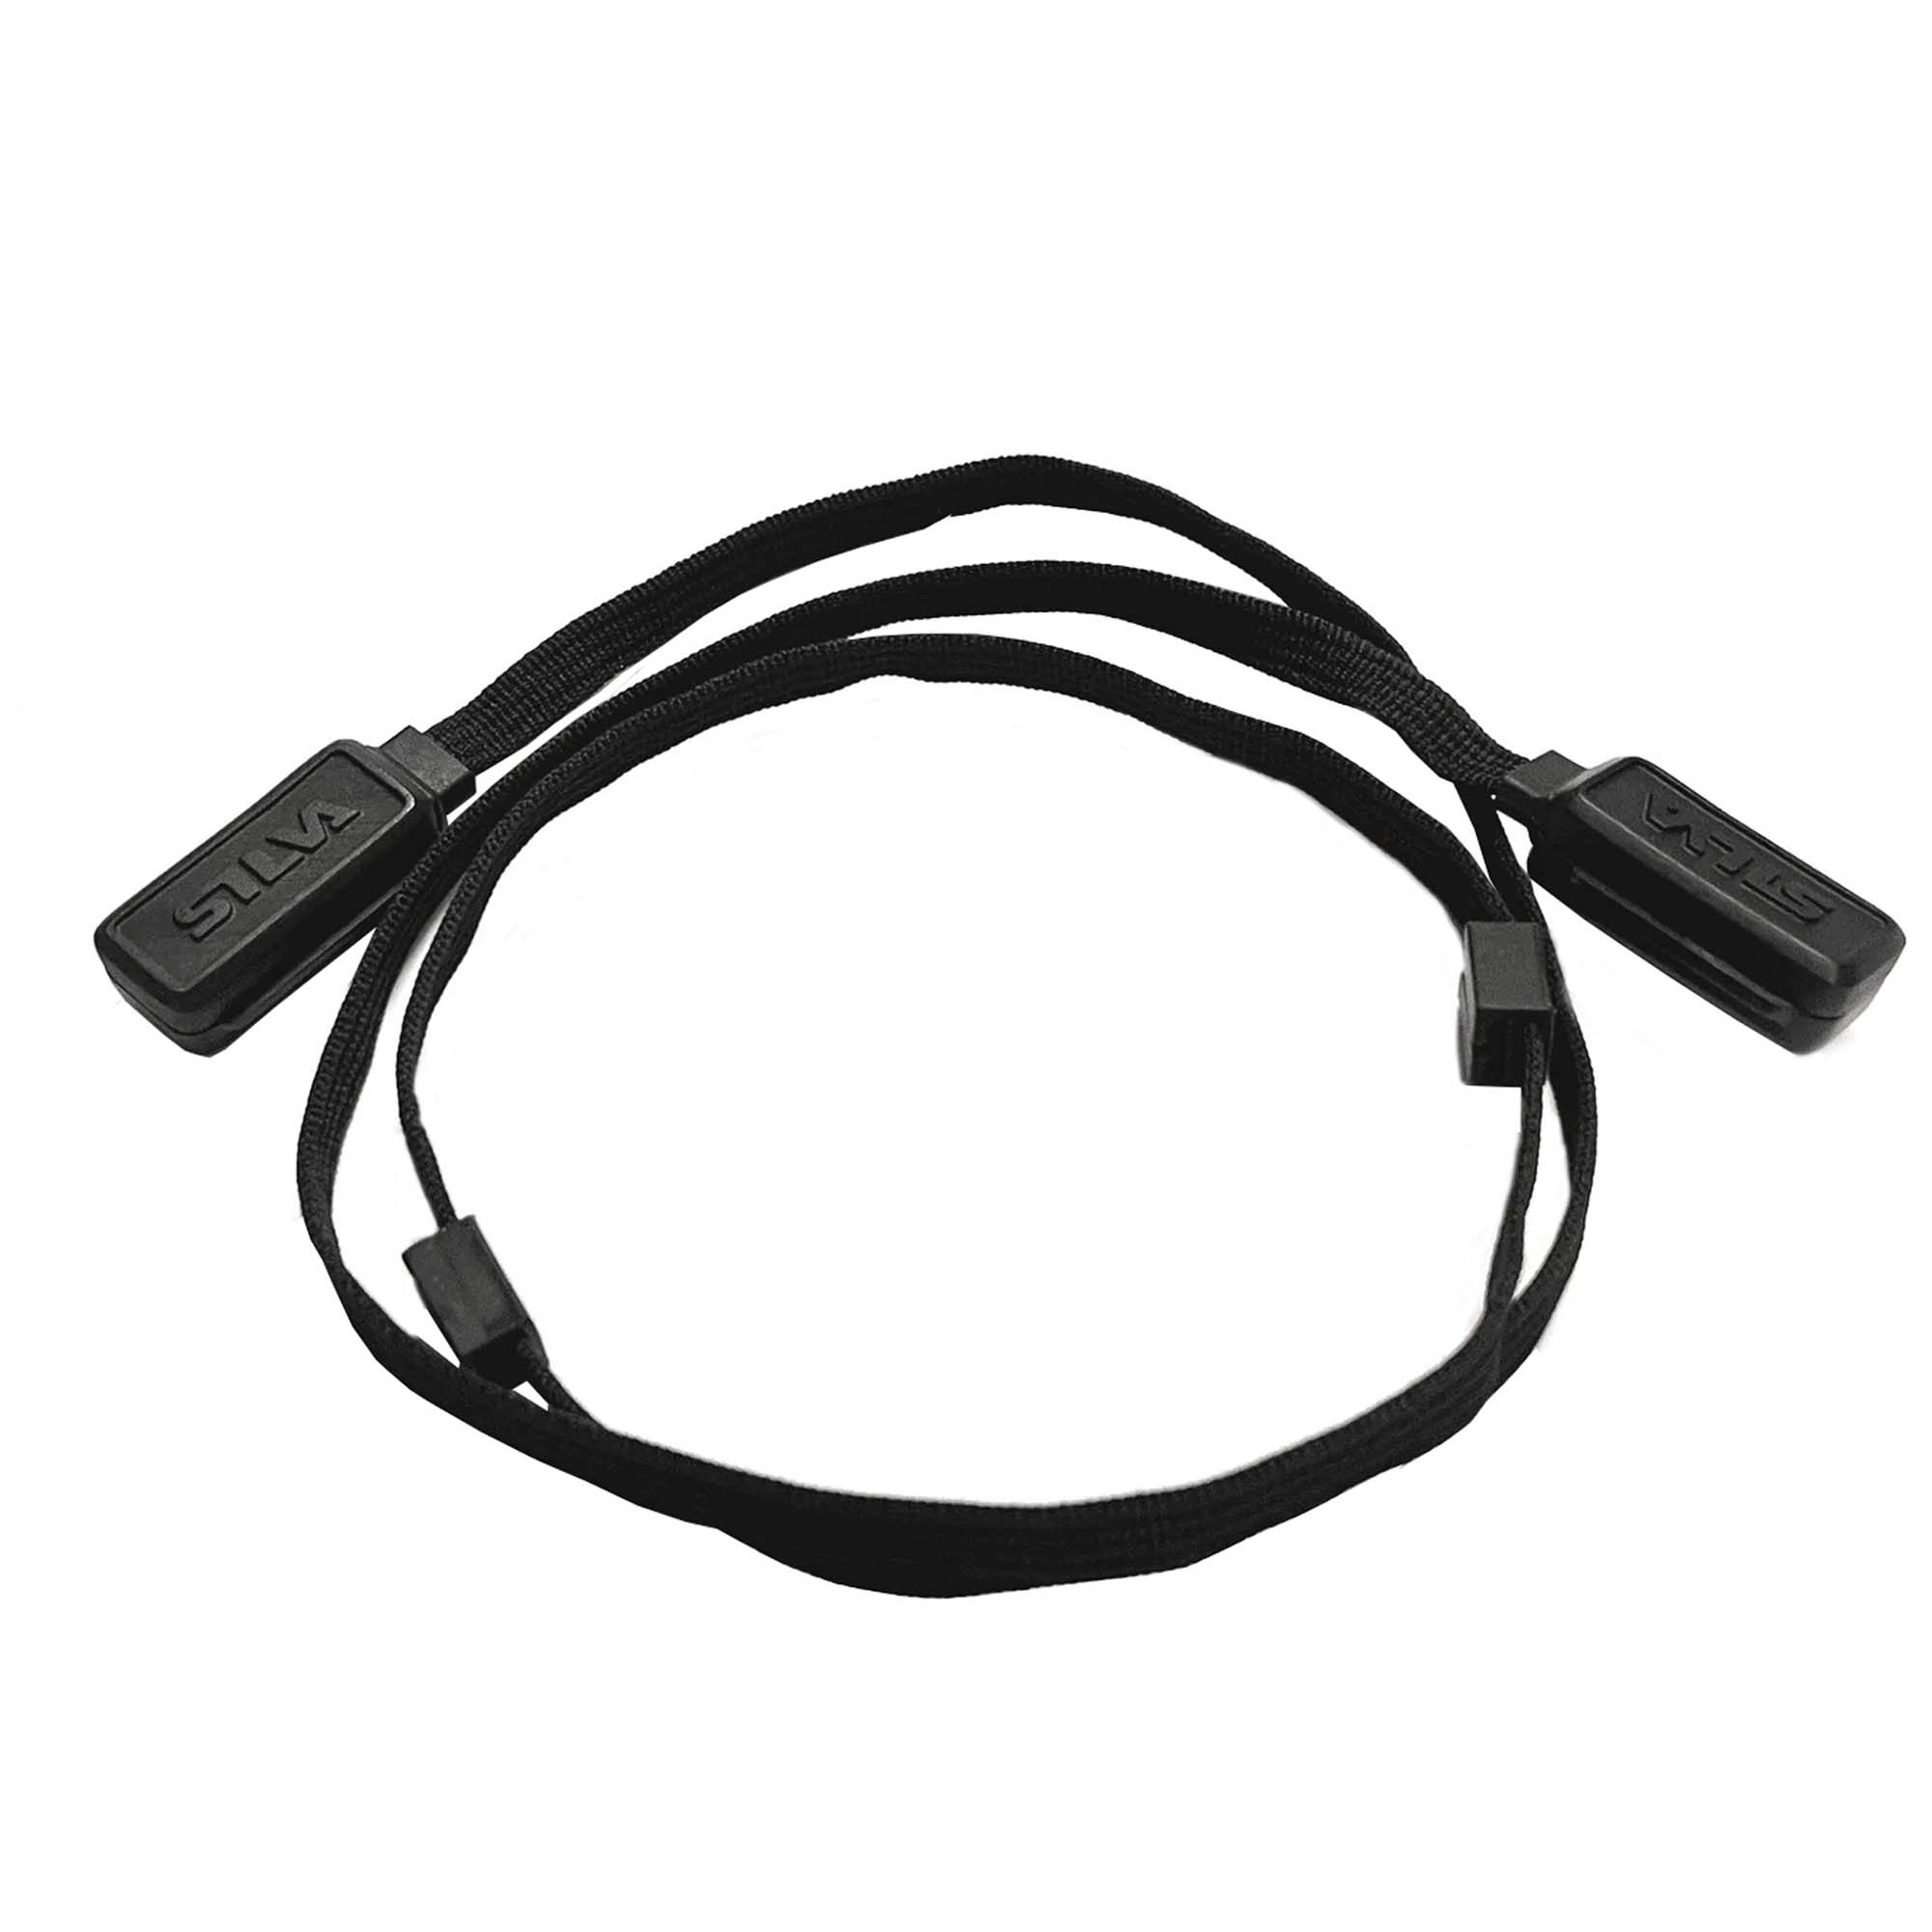 SILVA Free Extension Cable